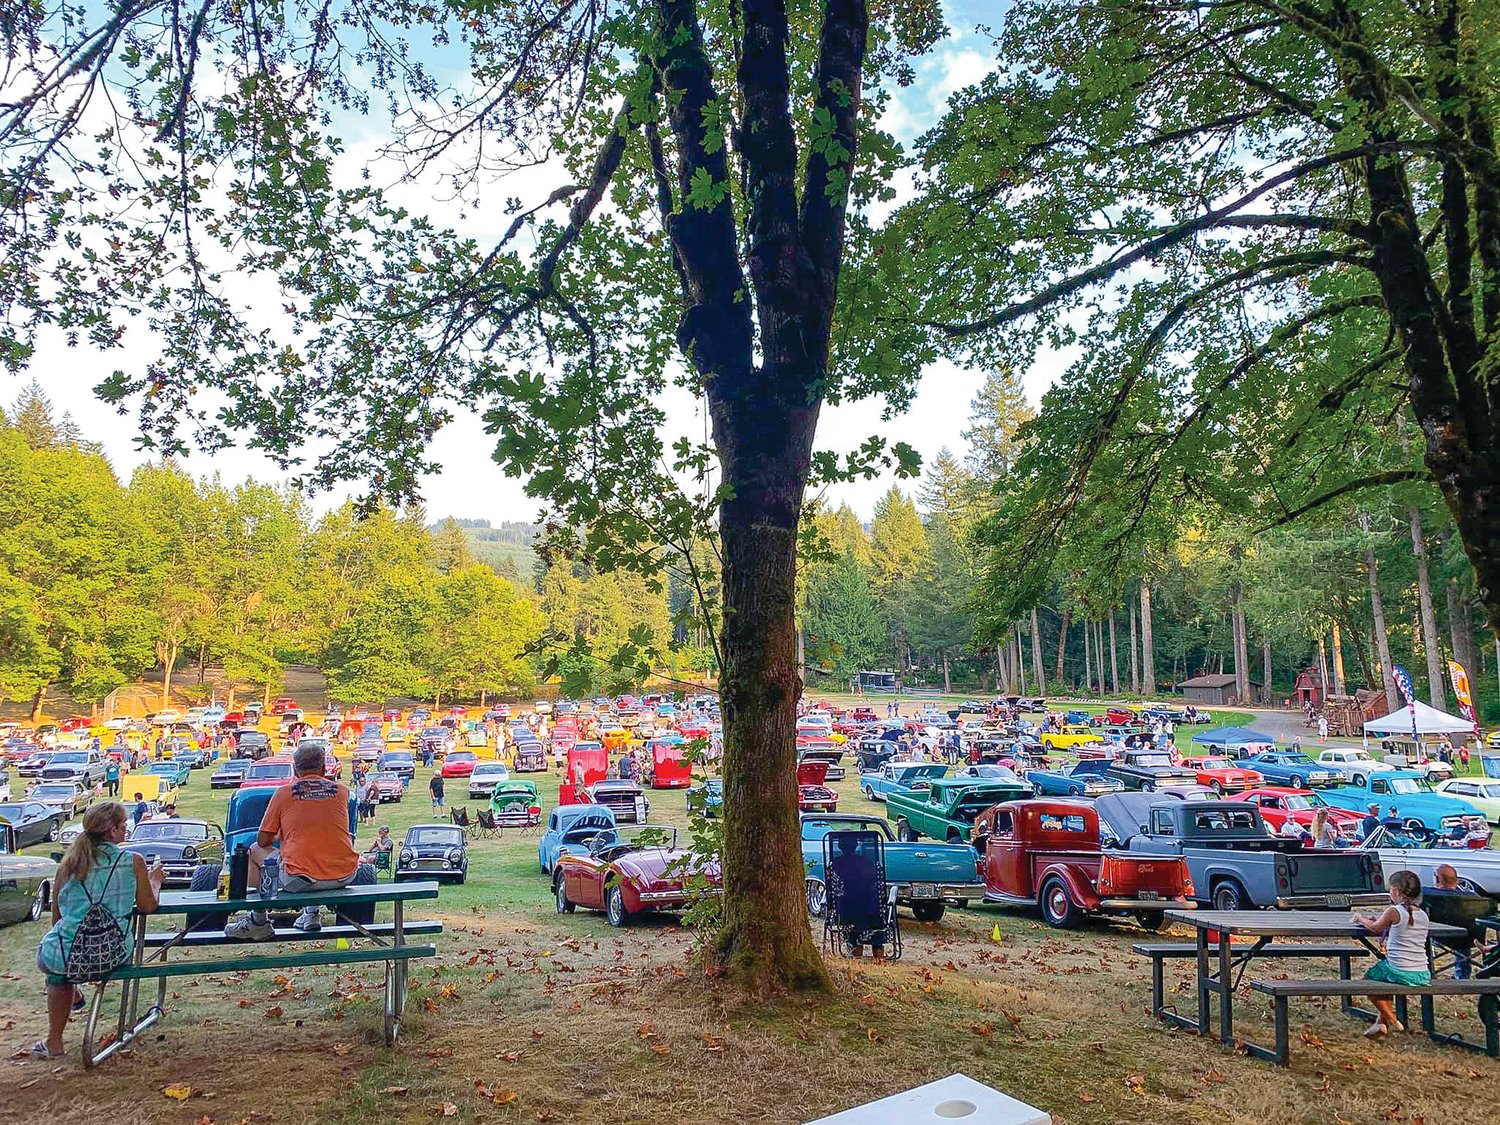 A plethora of classic cars are displayed on the field at Alderbrook Park in Brush Prairie.